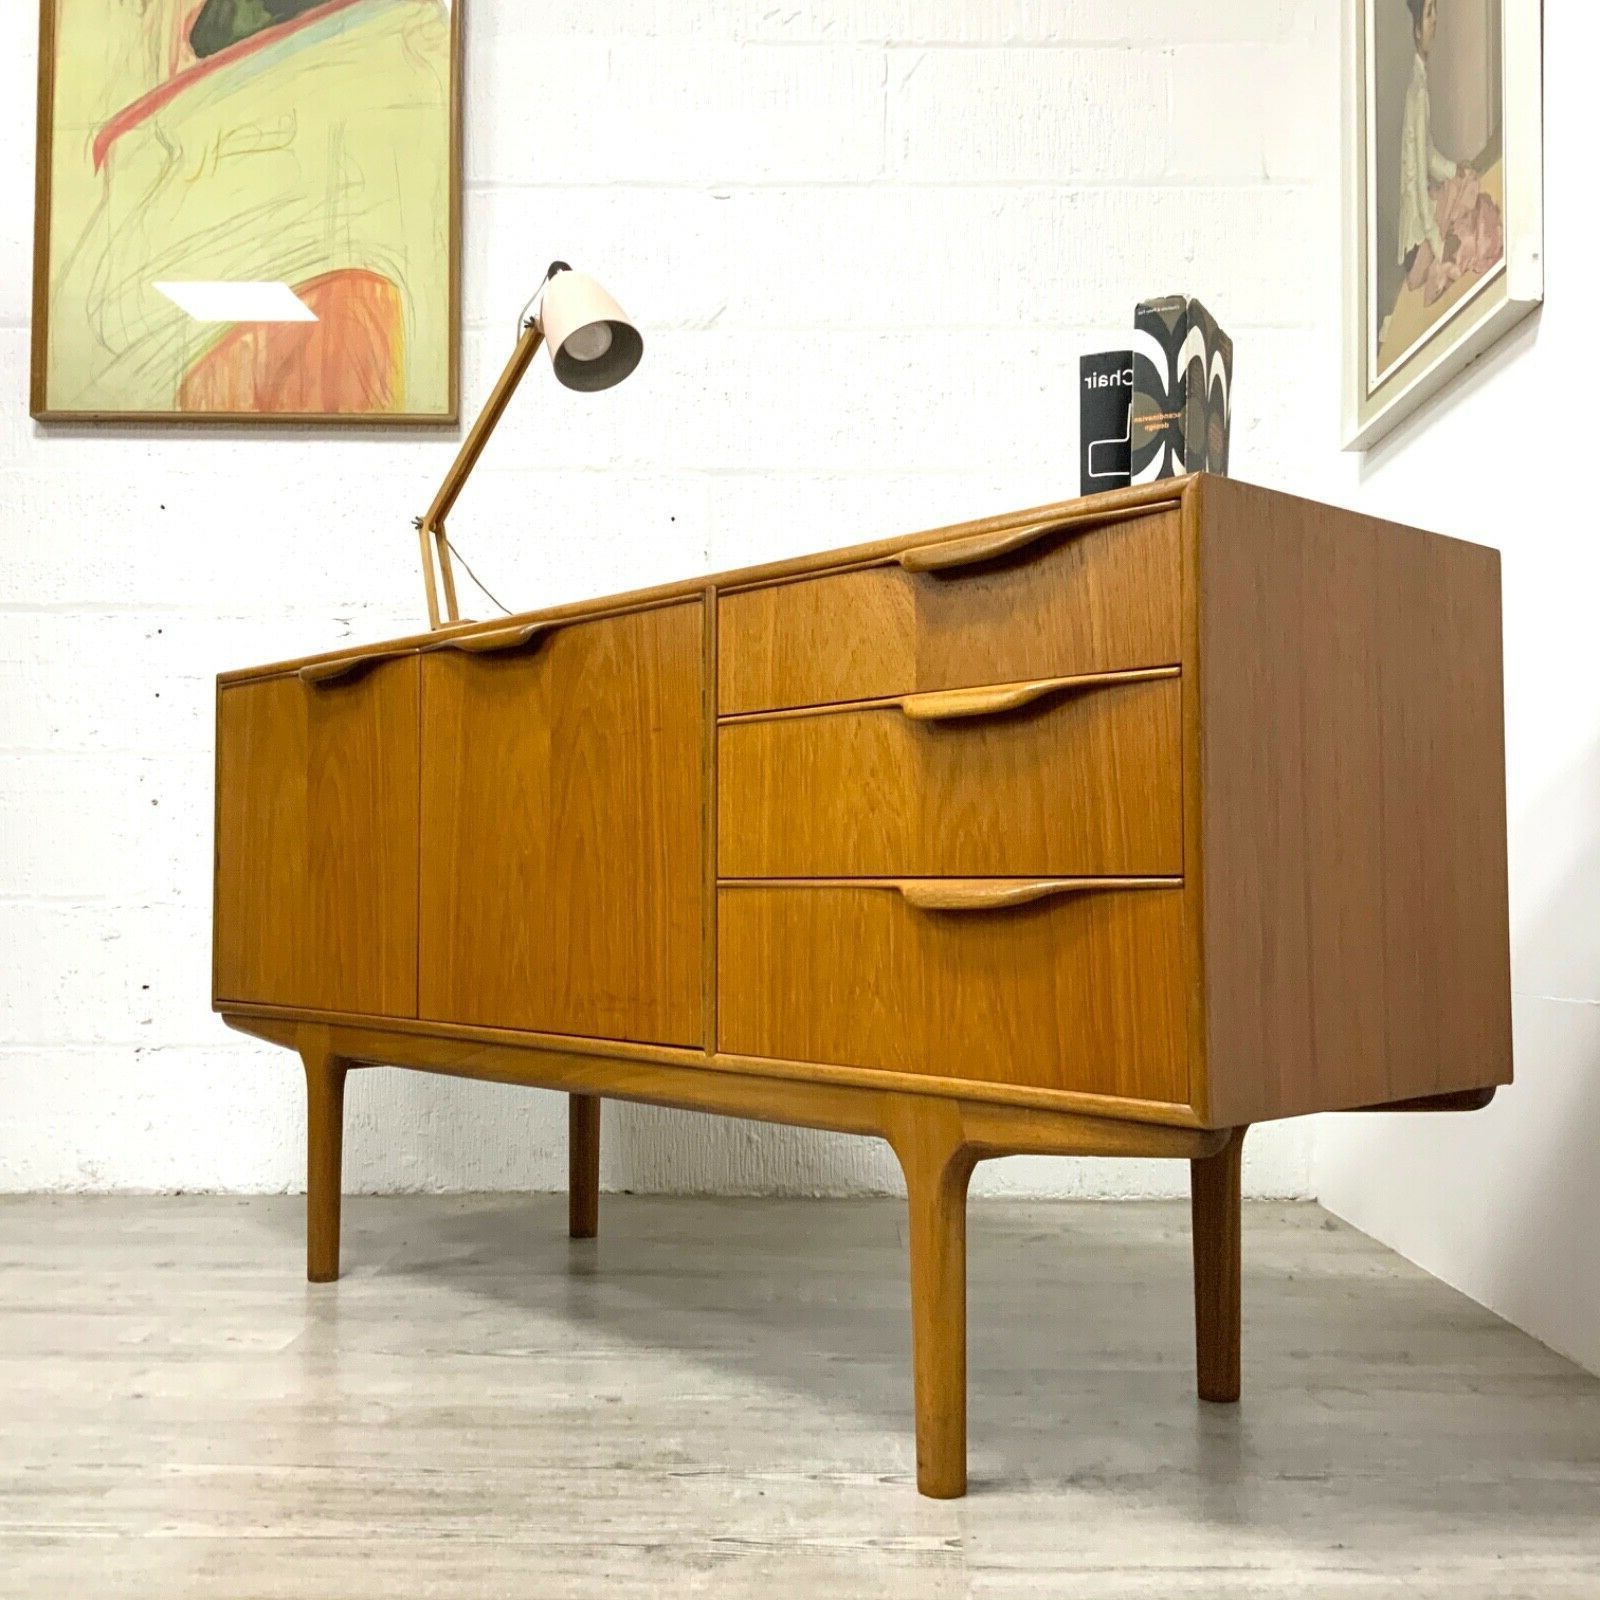 Mid Century Modern Sideboards For Sale | Vinterior In Mid Century Modern Sideboards (Gallery 16 of 20)